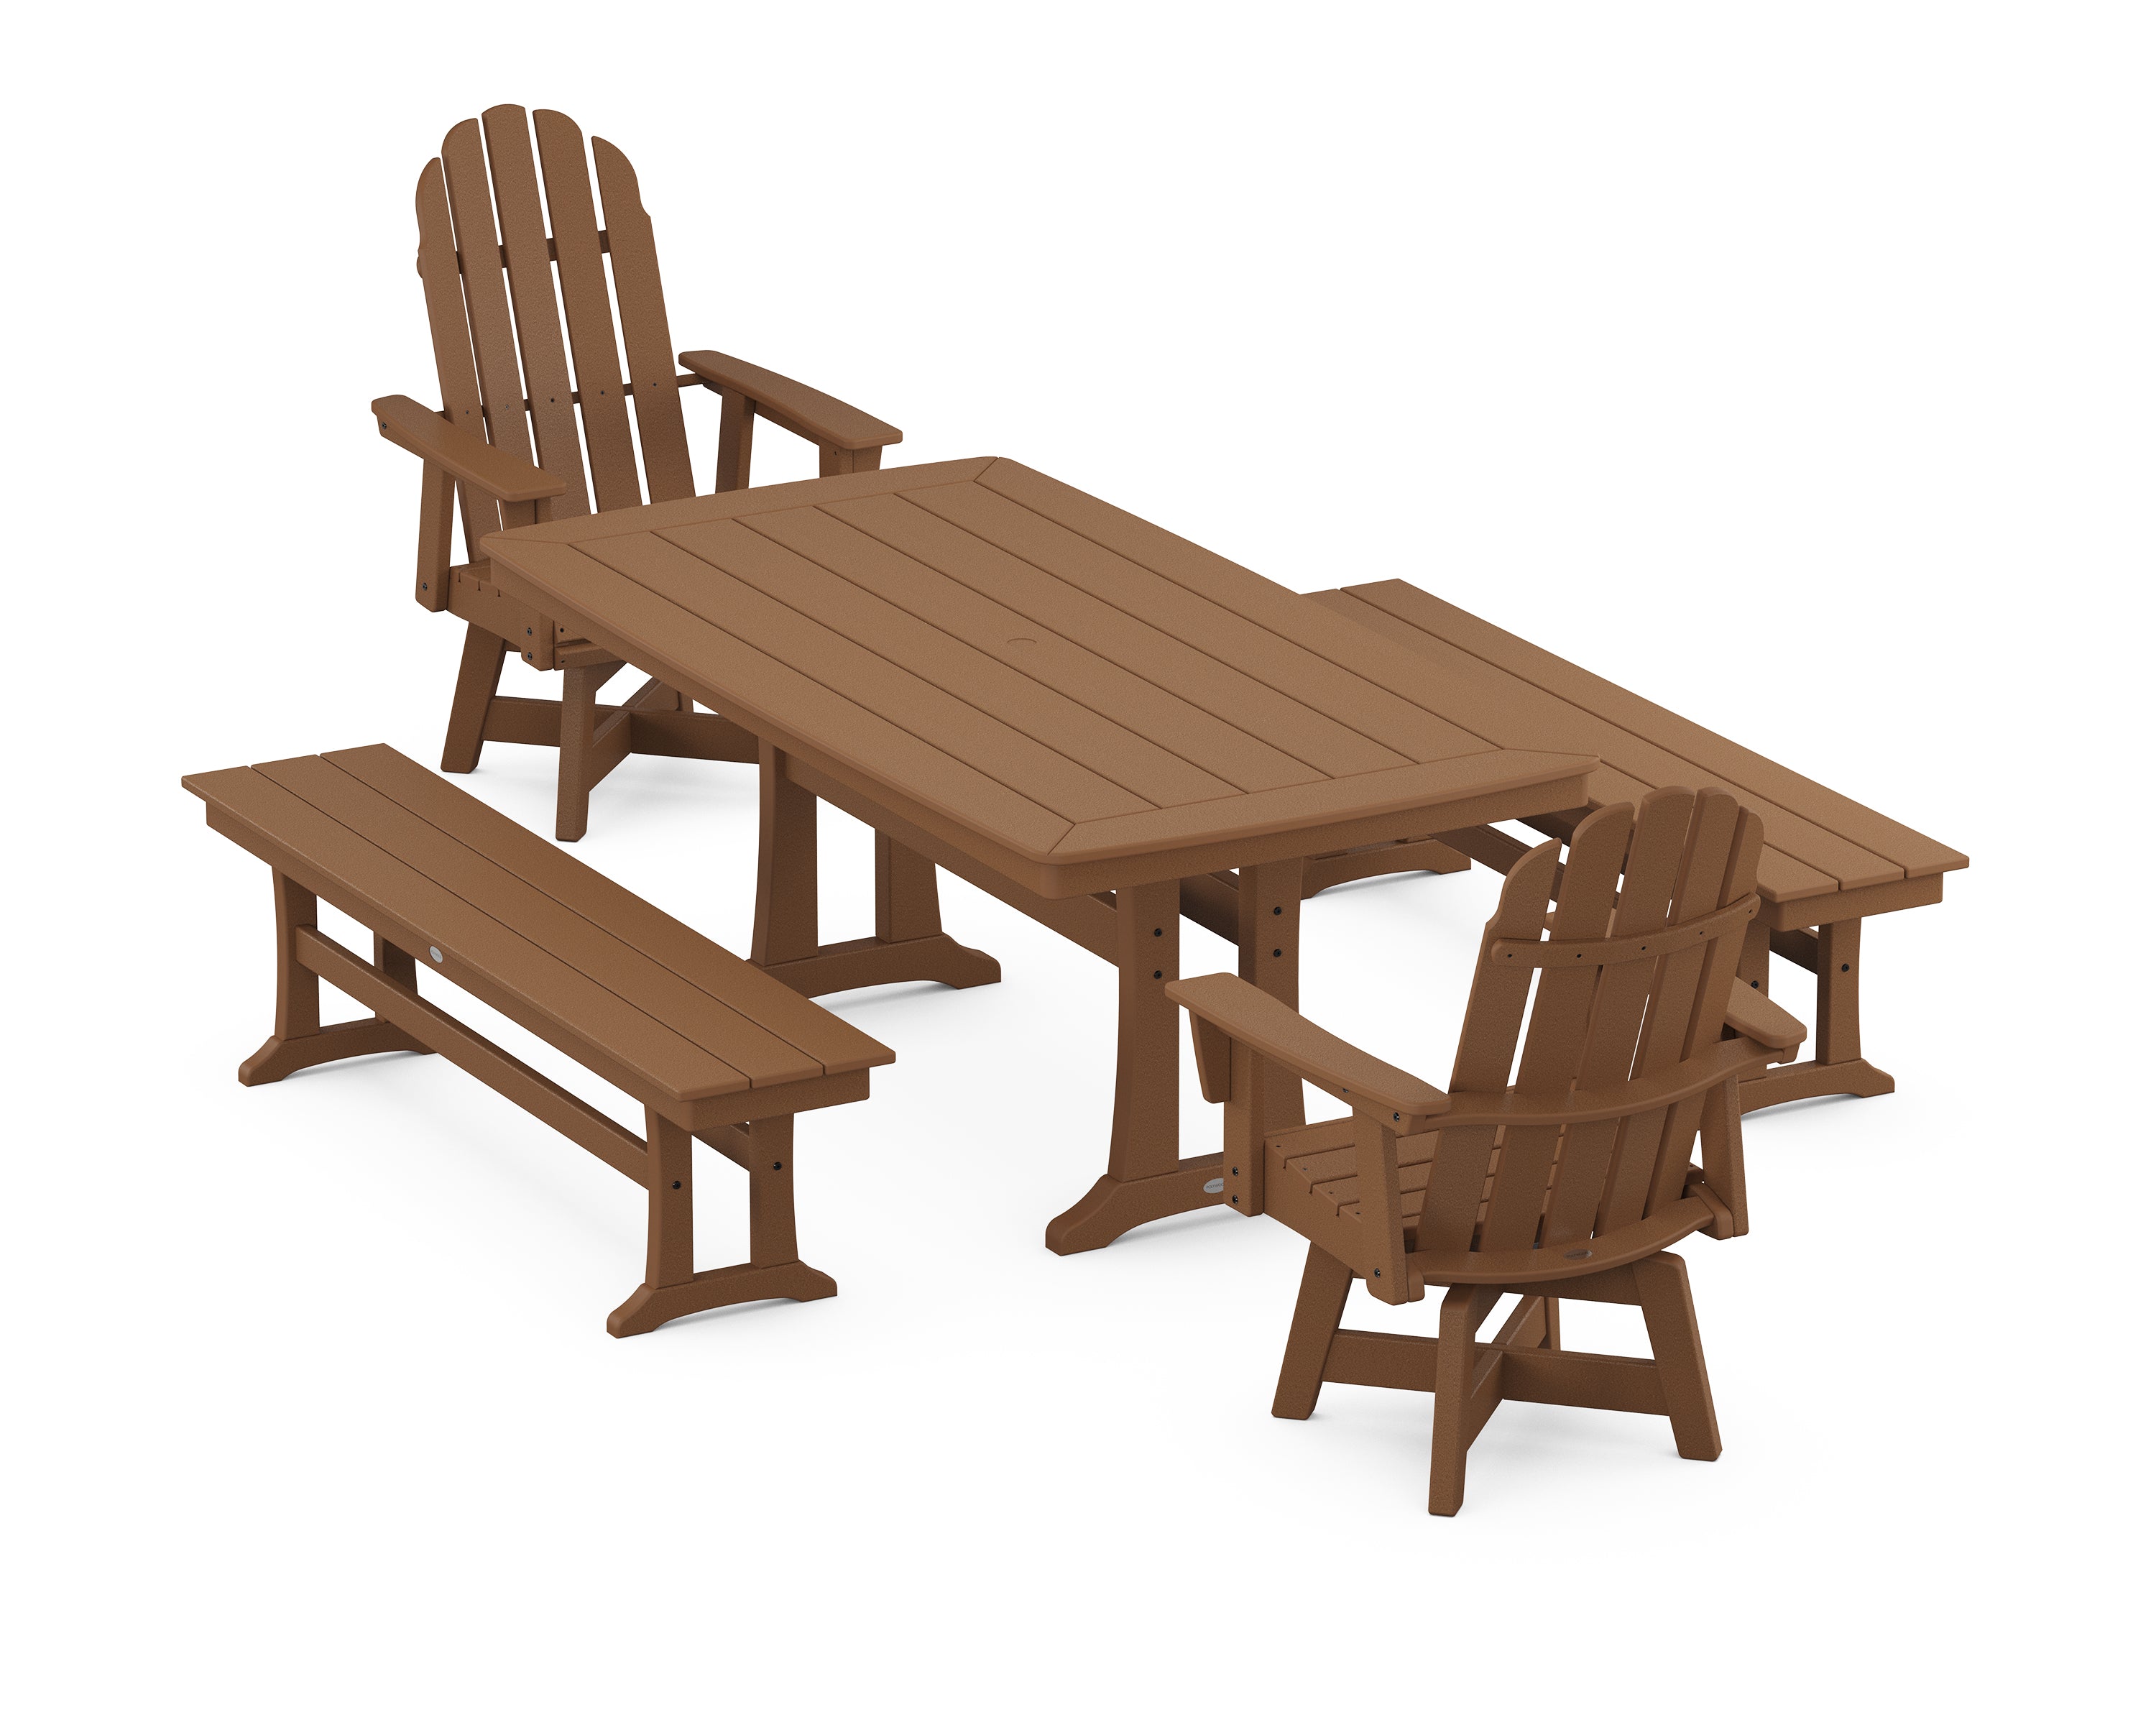 POLYWOOD® Vineyard Adirondack Swivel Chair 5-Piece Dining Set with Trestle Legs and Benches in Teak